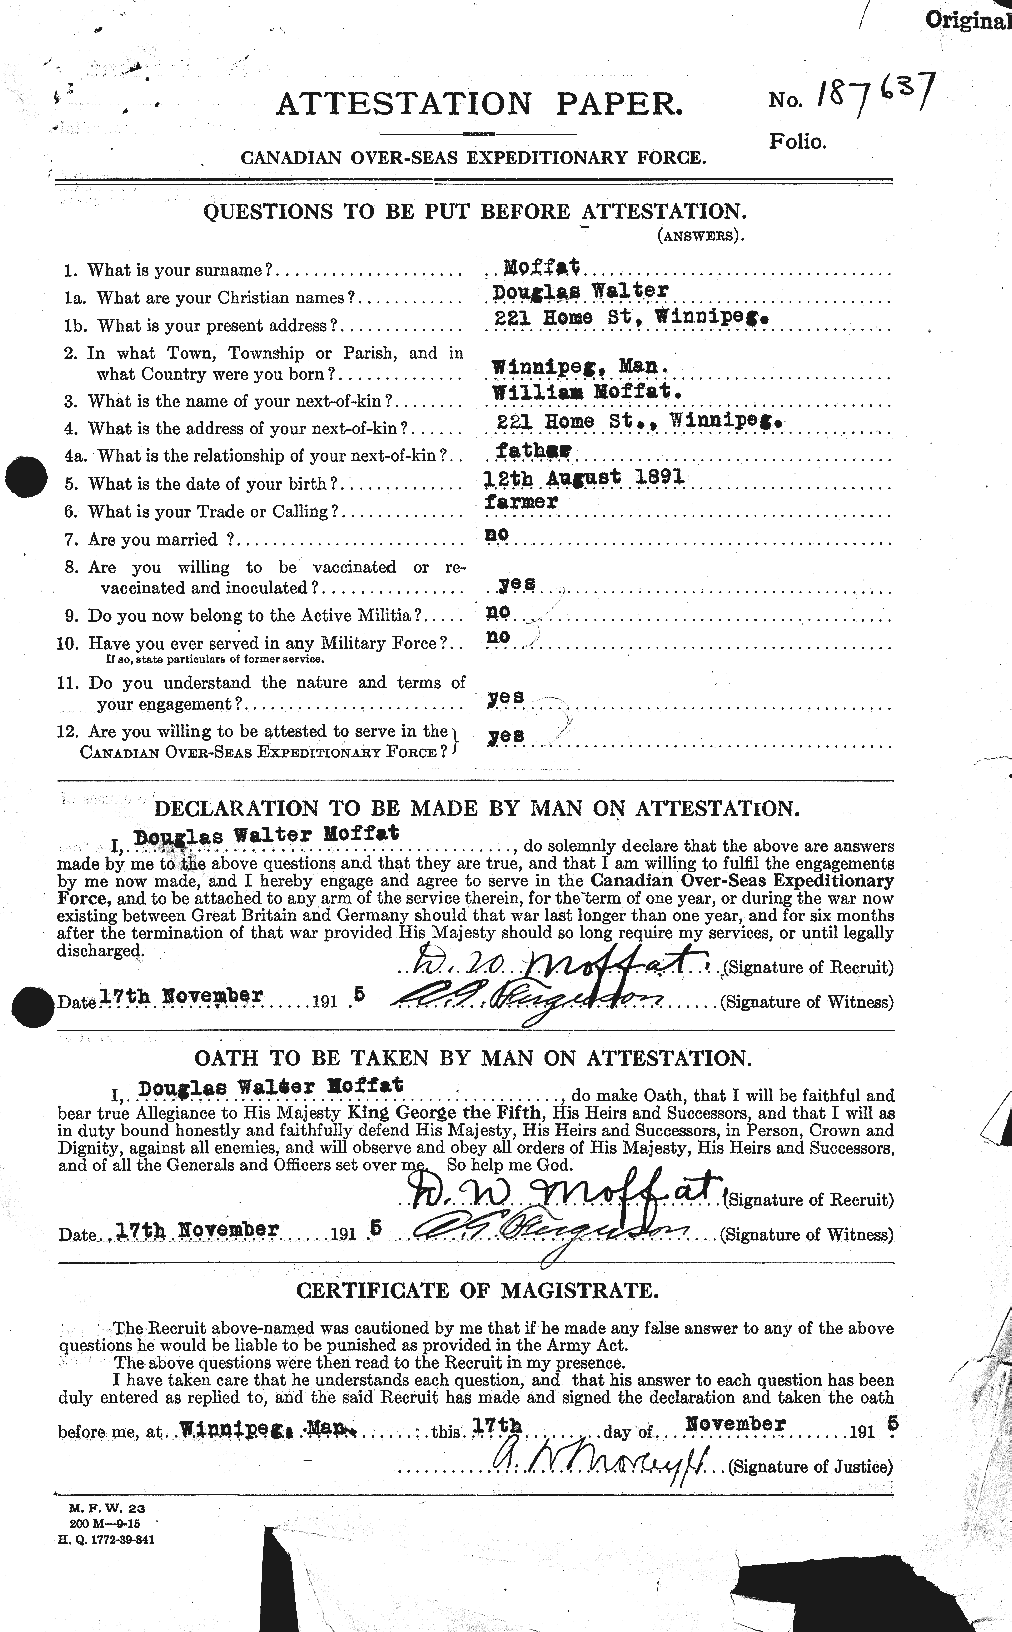 Personnel Records of the First World War - CEF 499006a